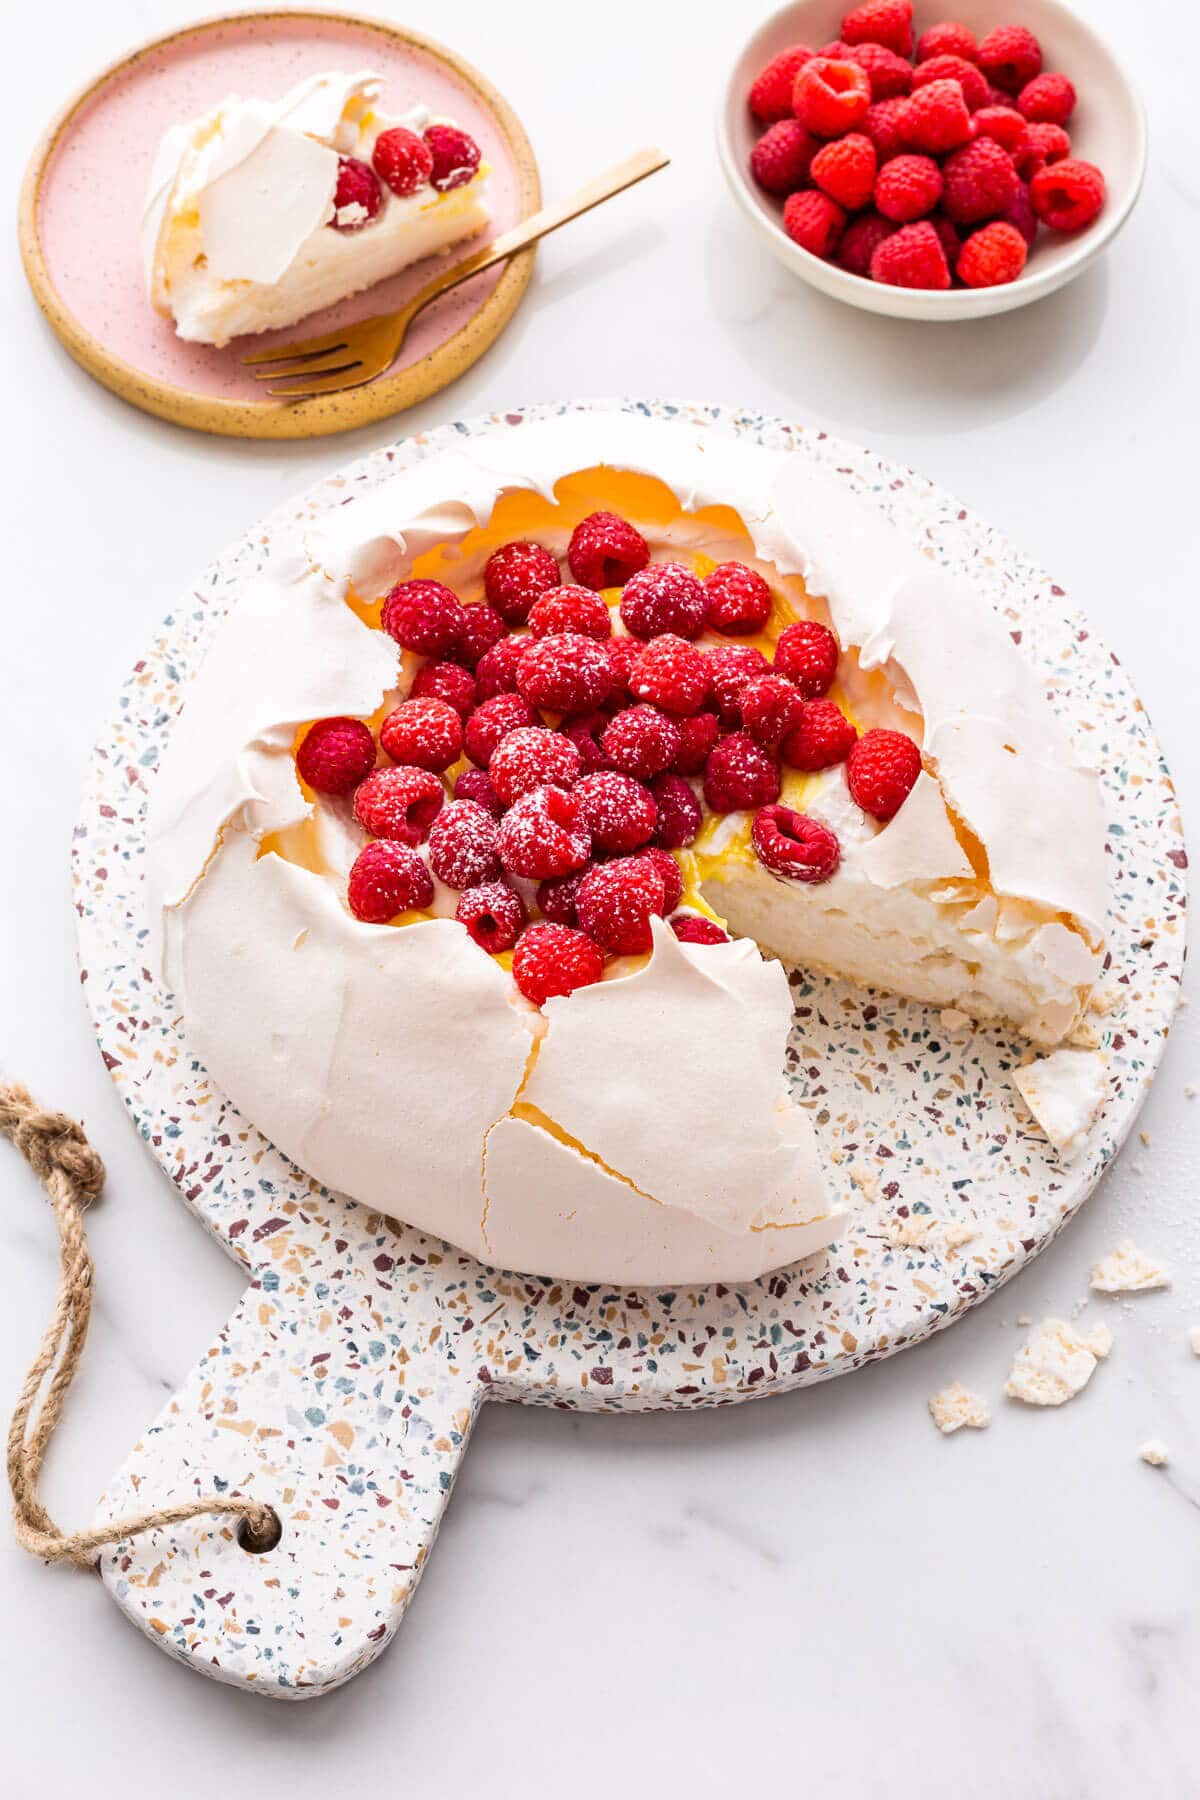 Pavlova cake filled with whipped cream, lemon curd, and raspberries being served.